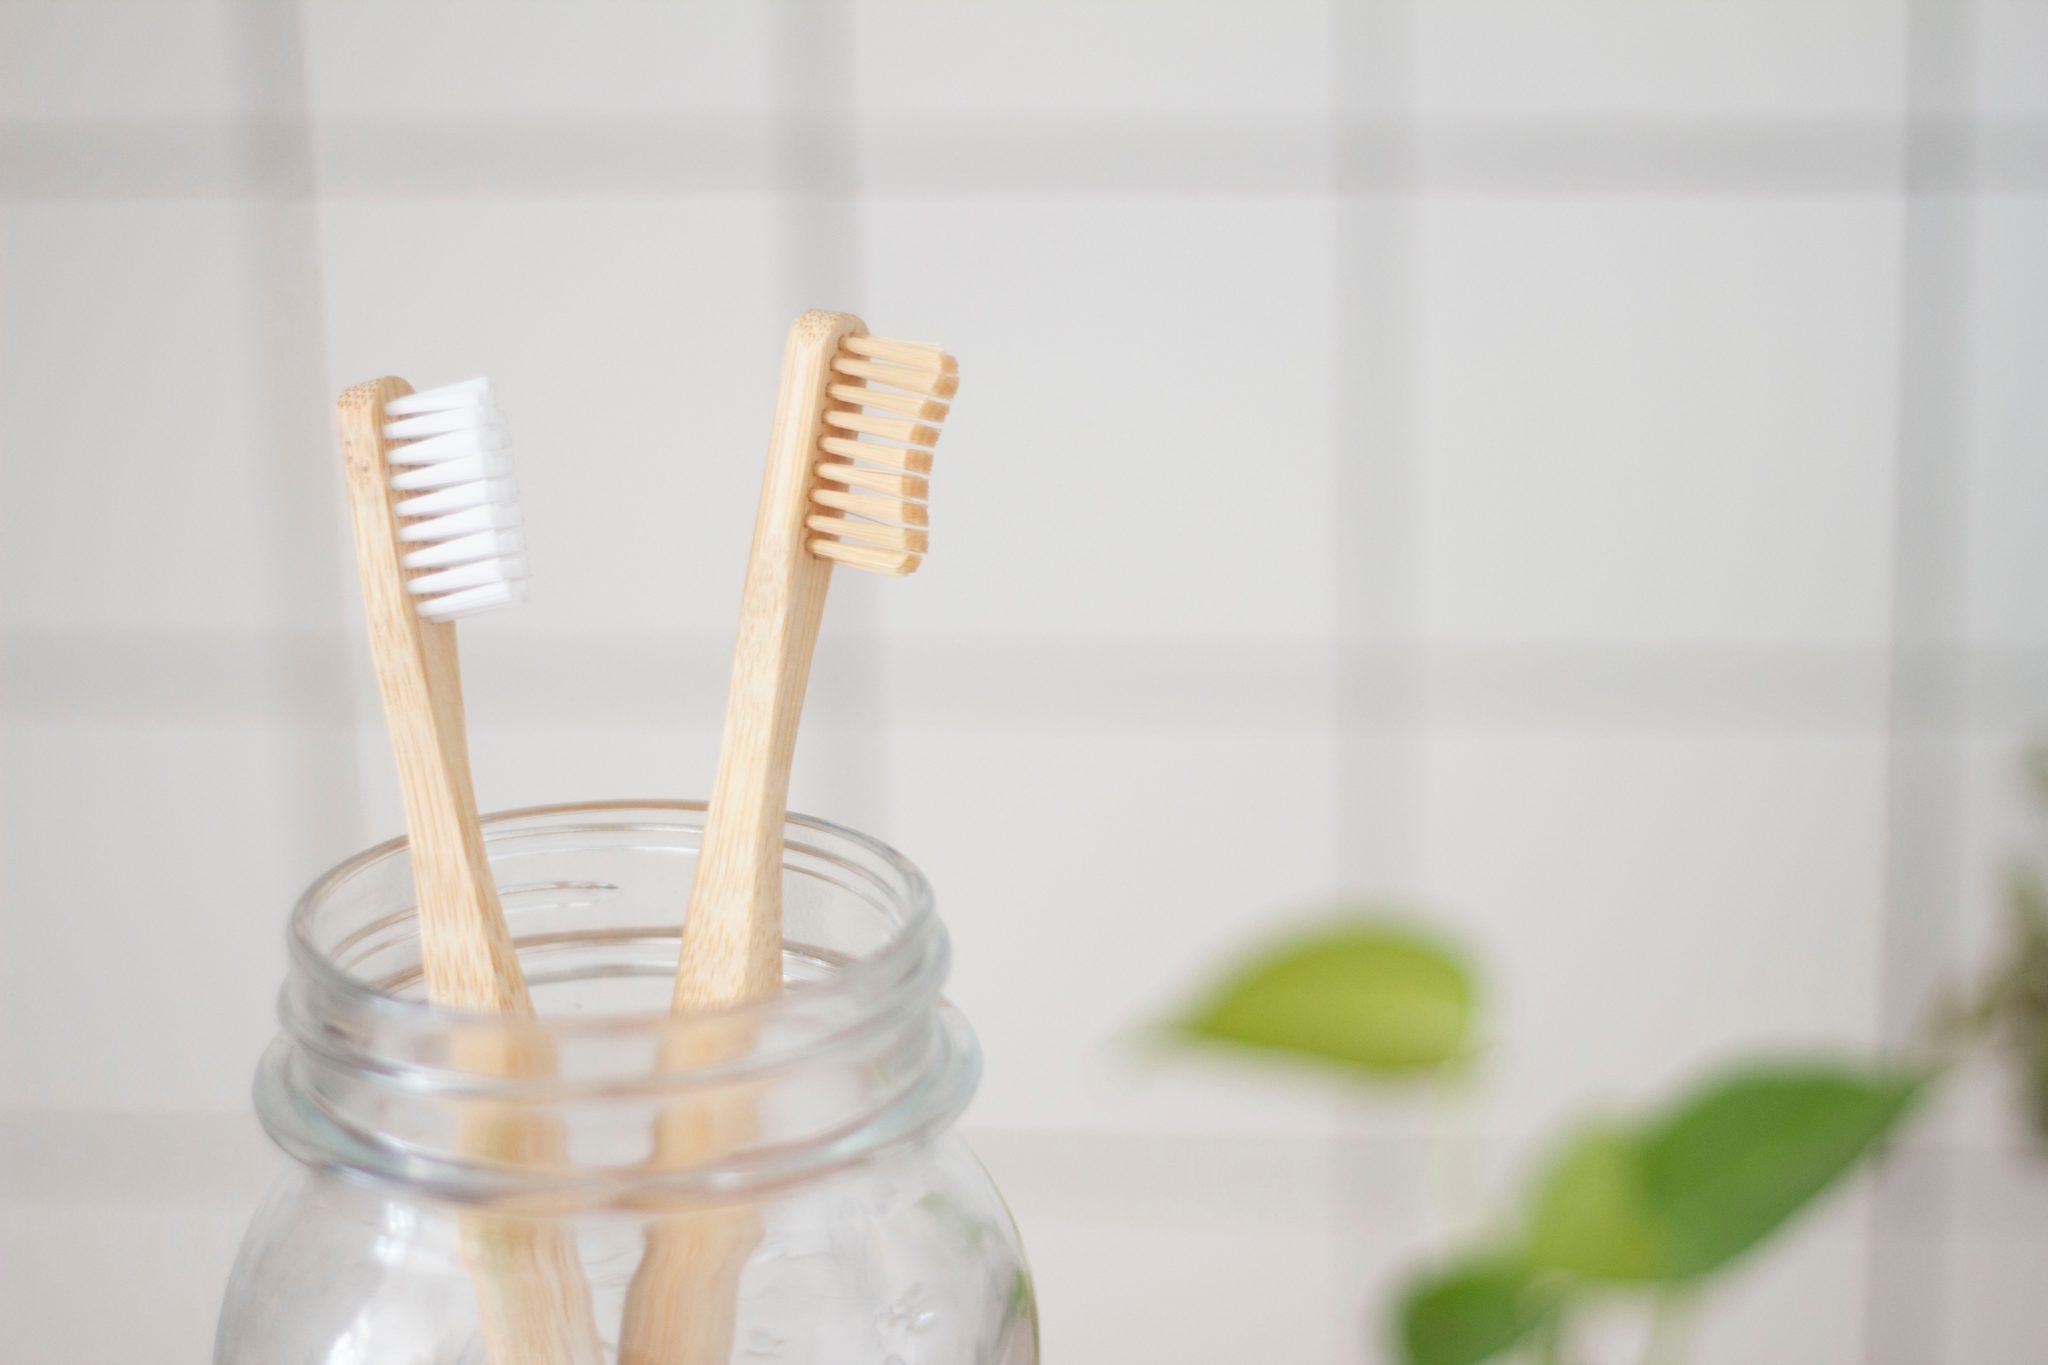 Bamboo toothbrush for eco-friendly, sustainable living